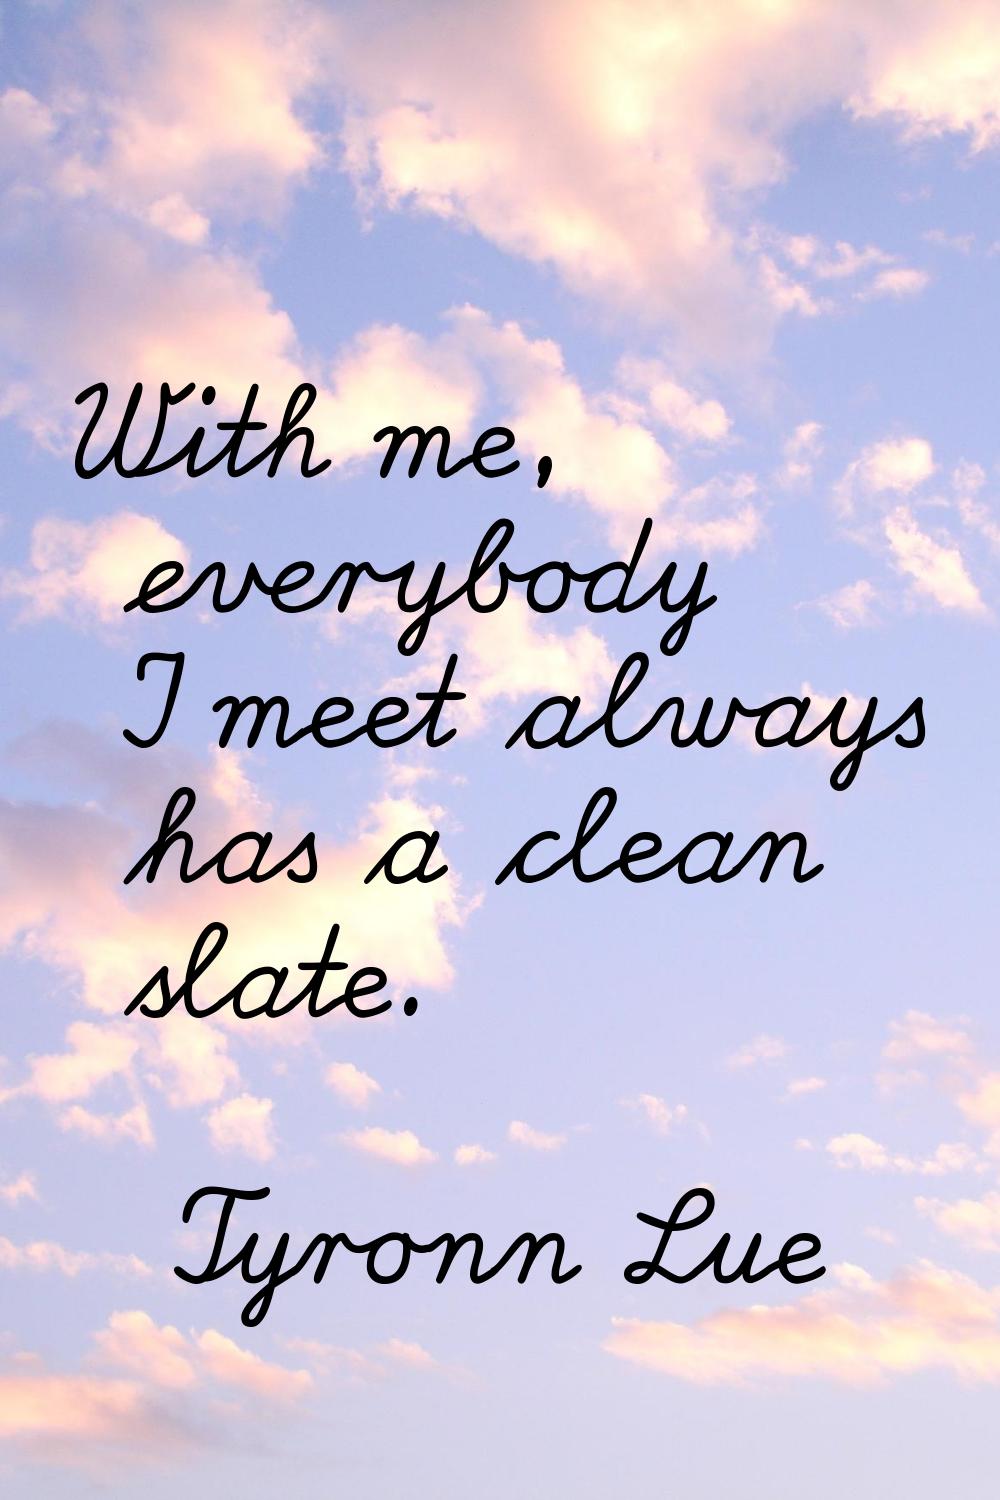 With me, everybody I meet always has a clean slate.